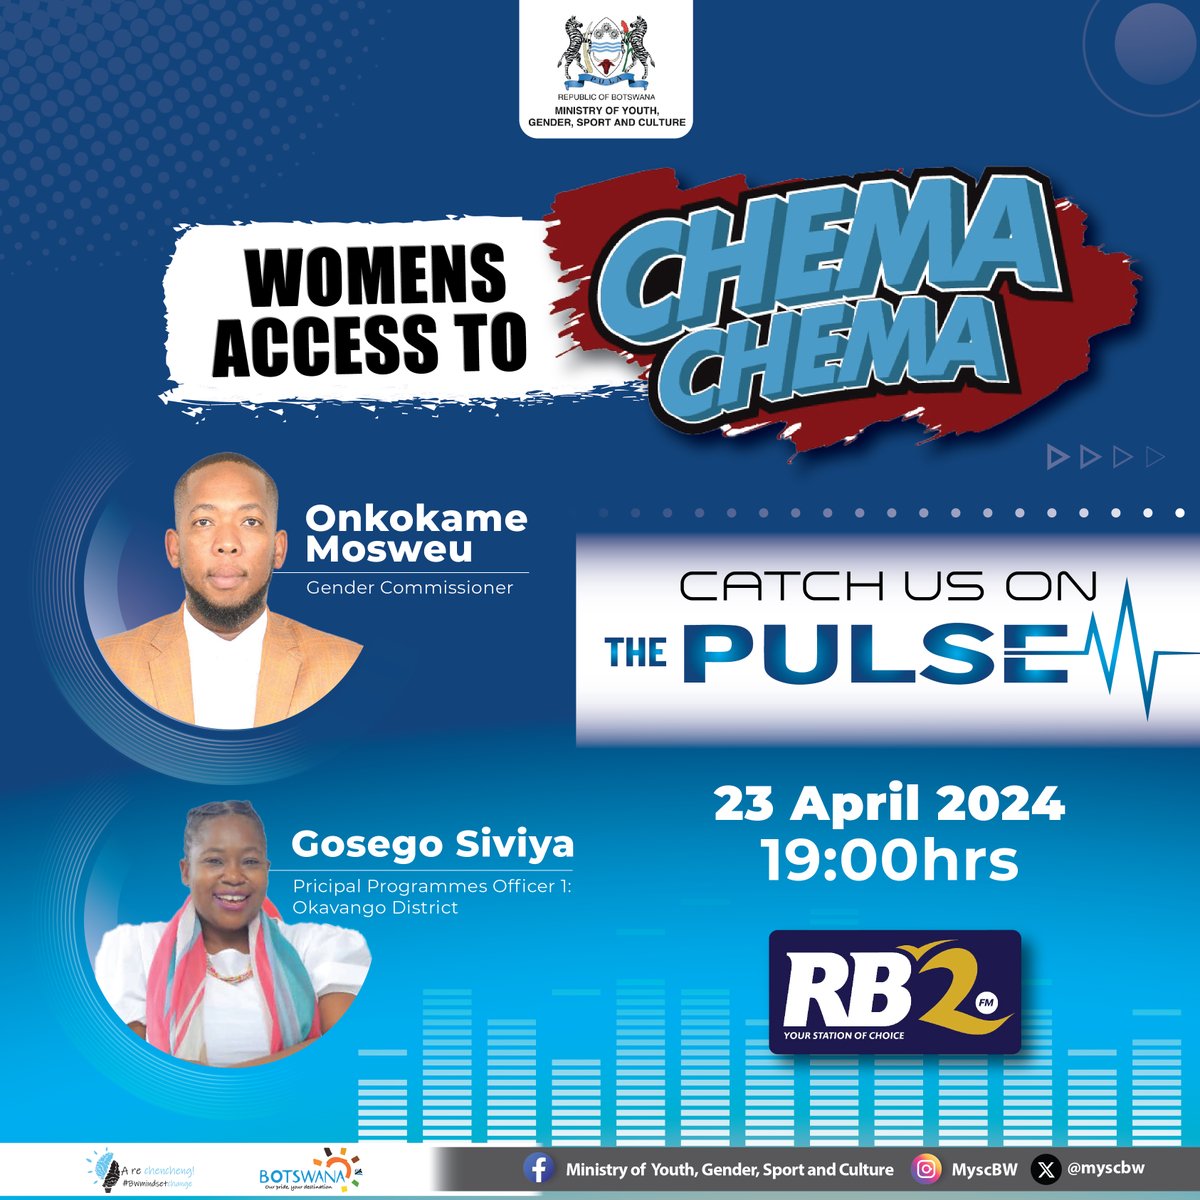 Dumelang Ditsala, If you have sometime tomorrow evening, Please tune into RB2 as I will be discussing all things Chema Chema and Women's Access to Chema Chema, It will be super informative.